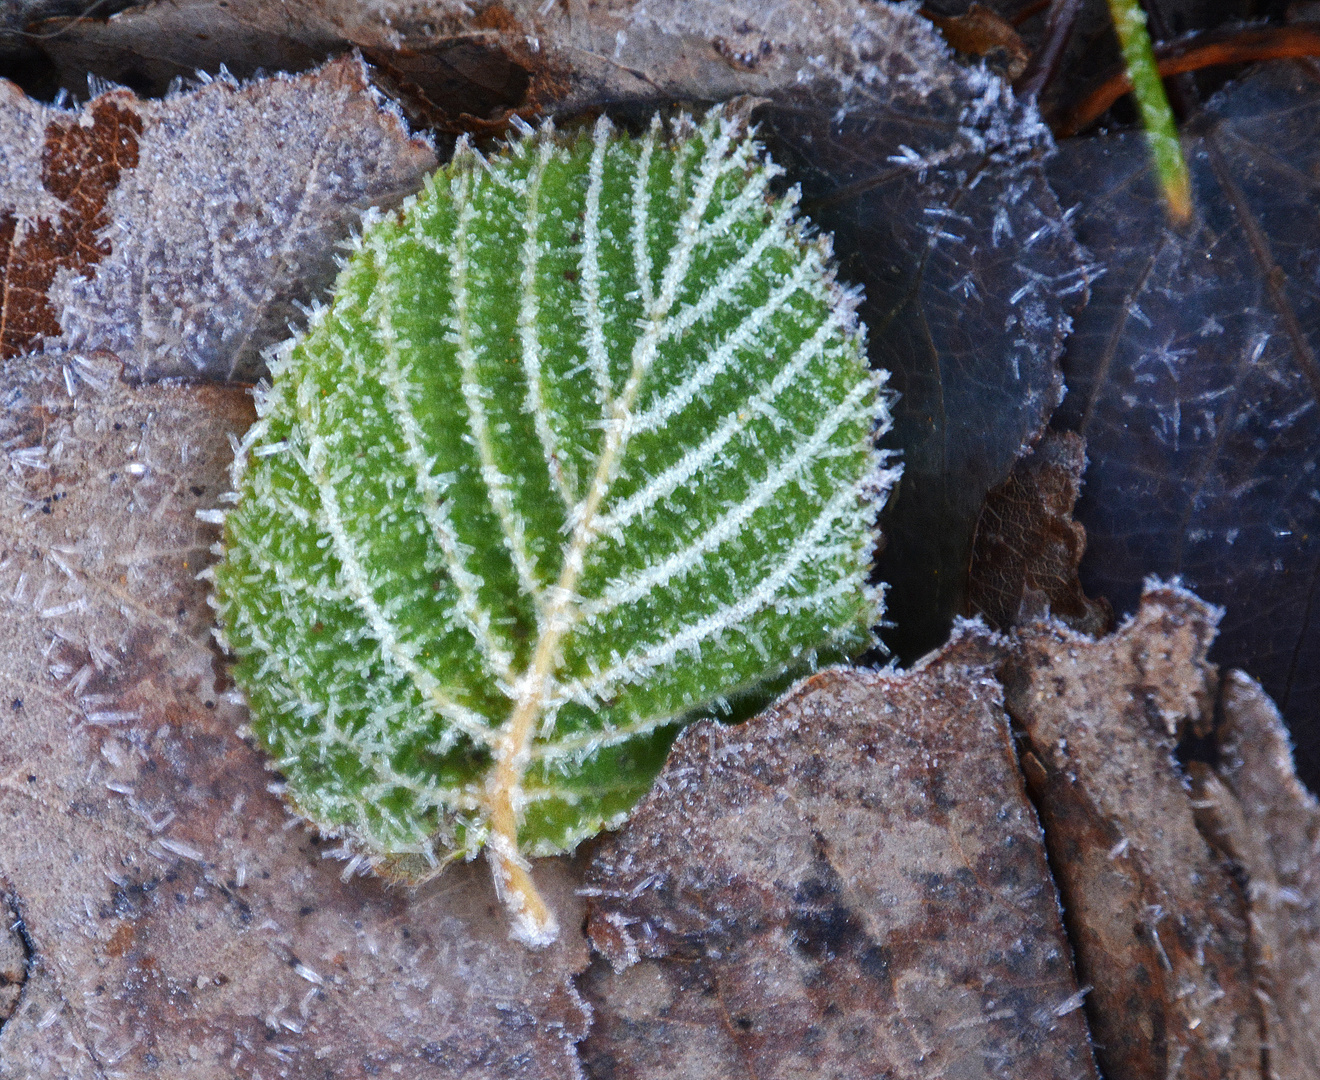 With frost leaf